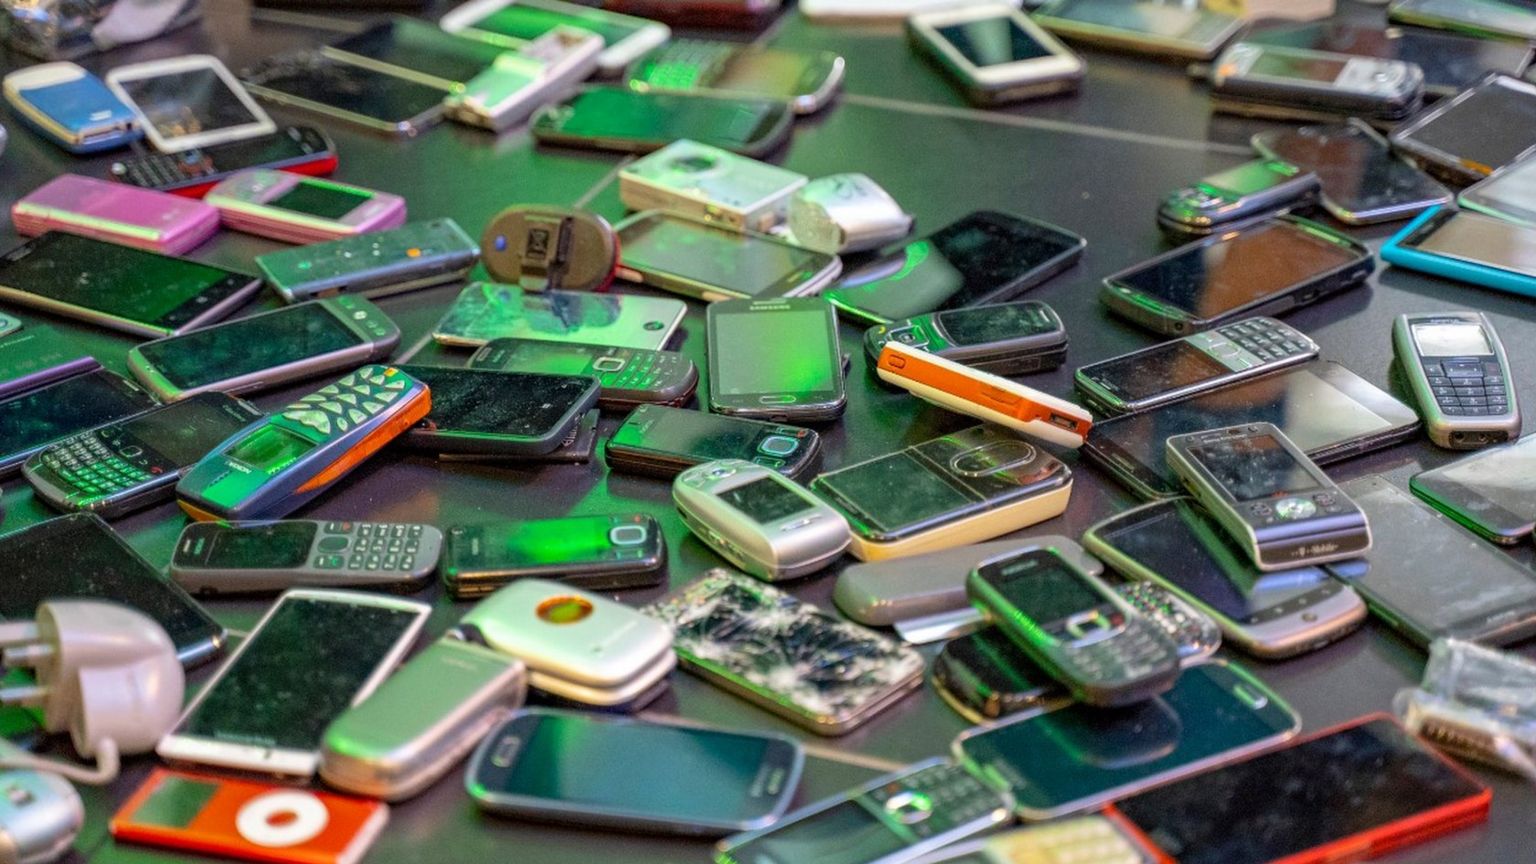 Smart phones contain around 30 different elements, some of which the Earth is running out of